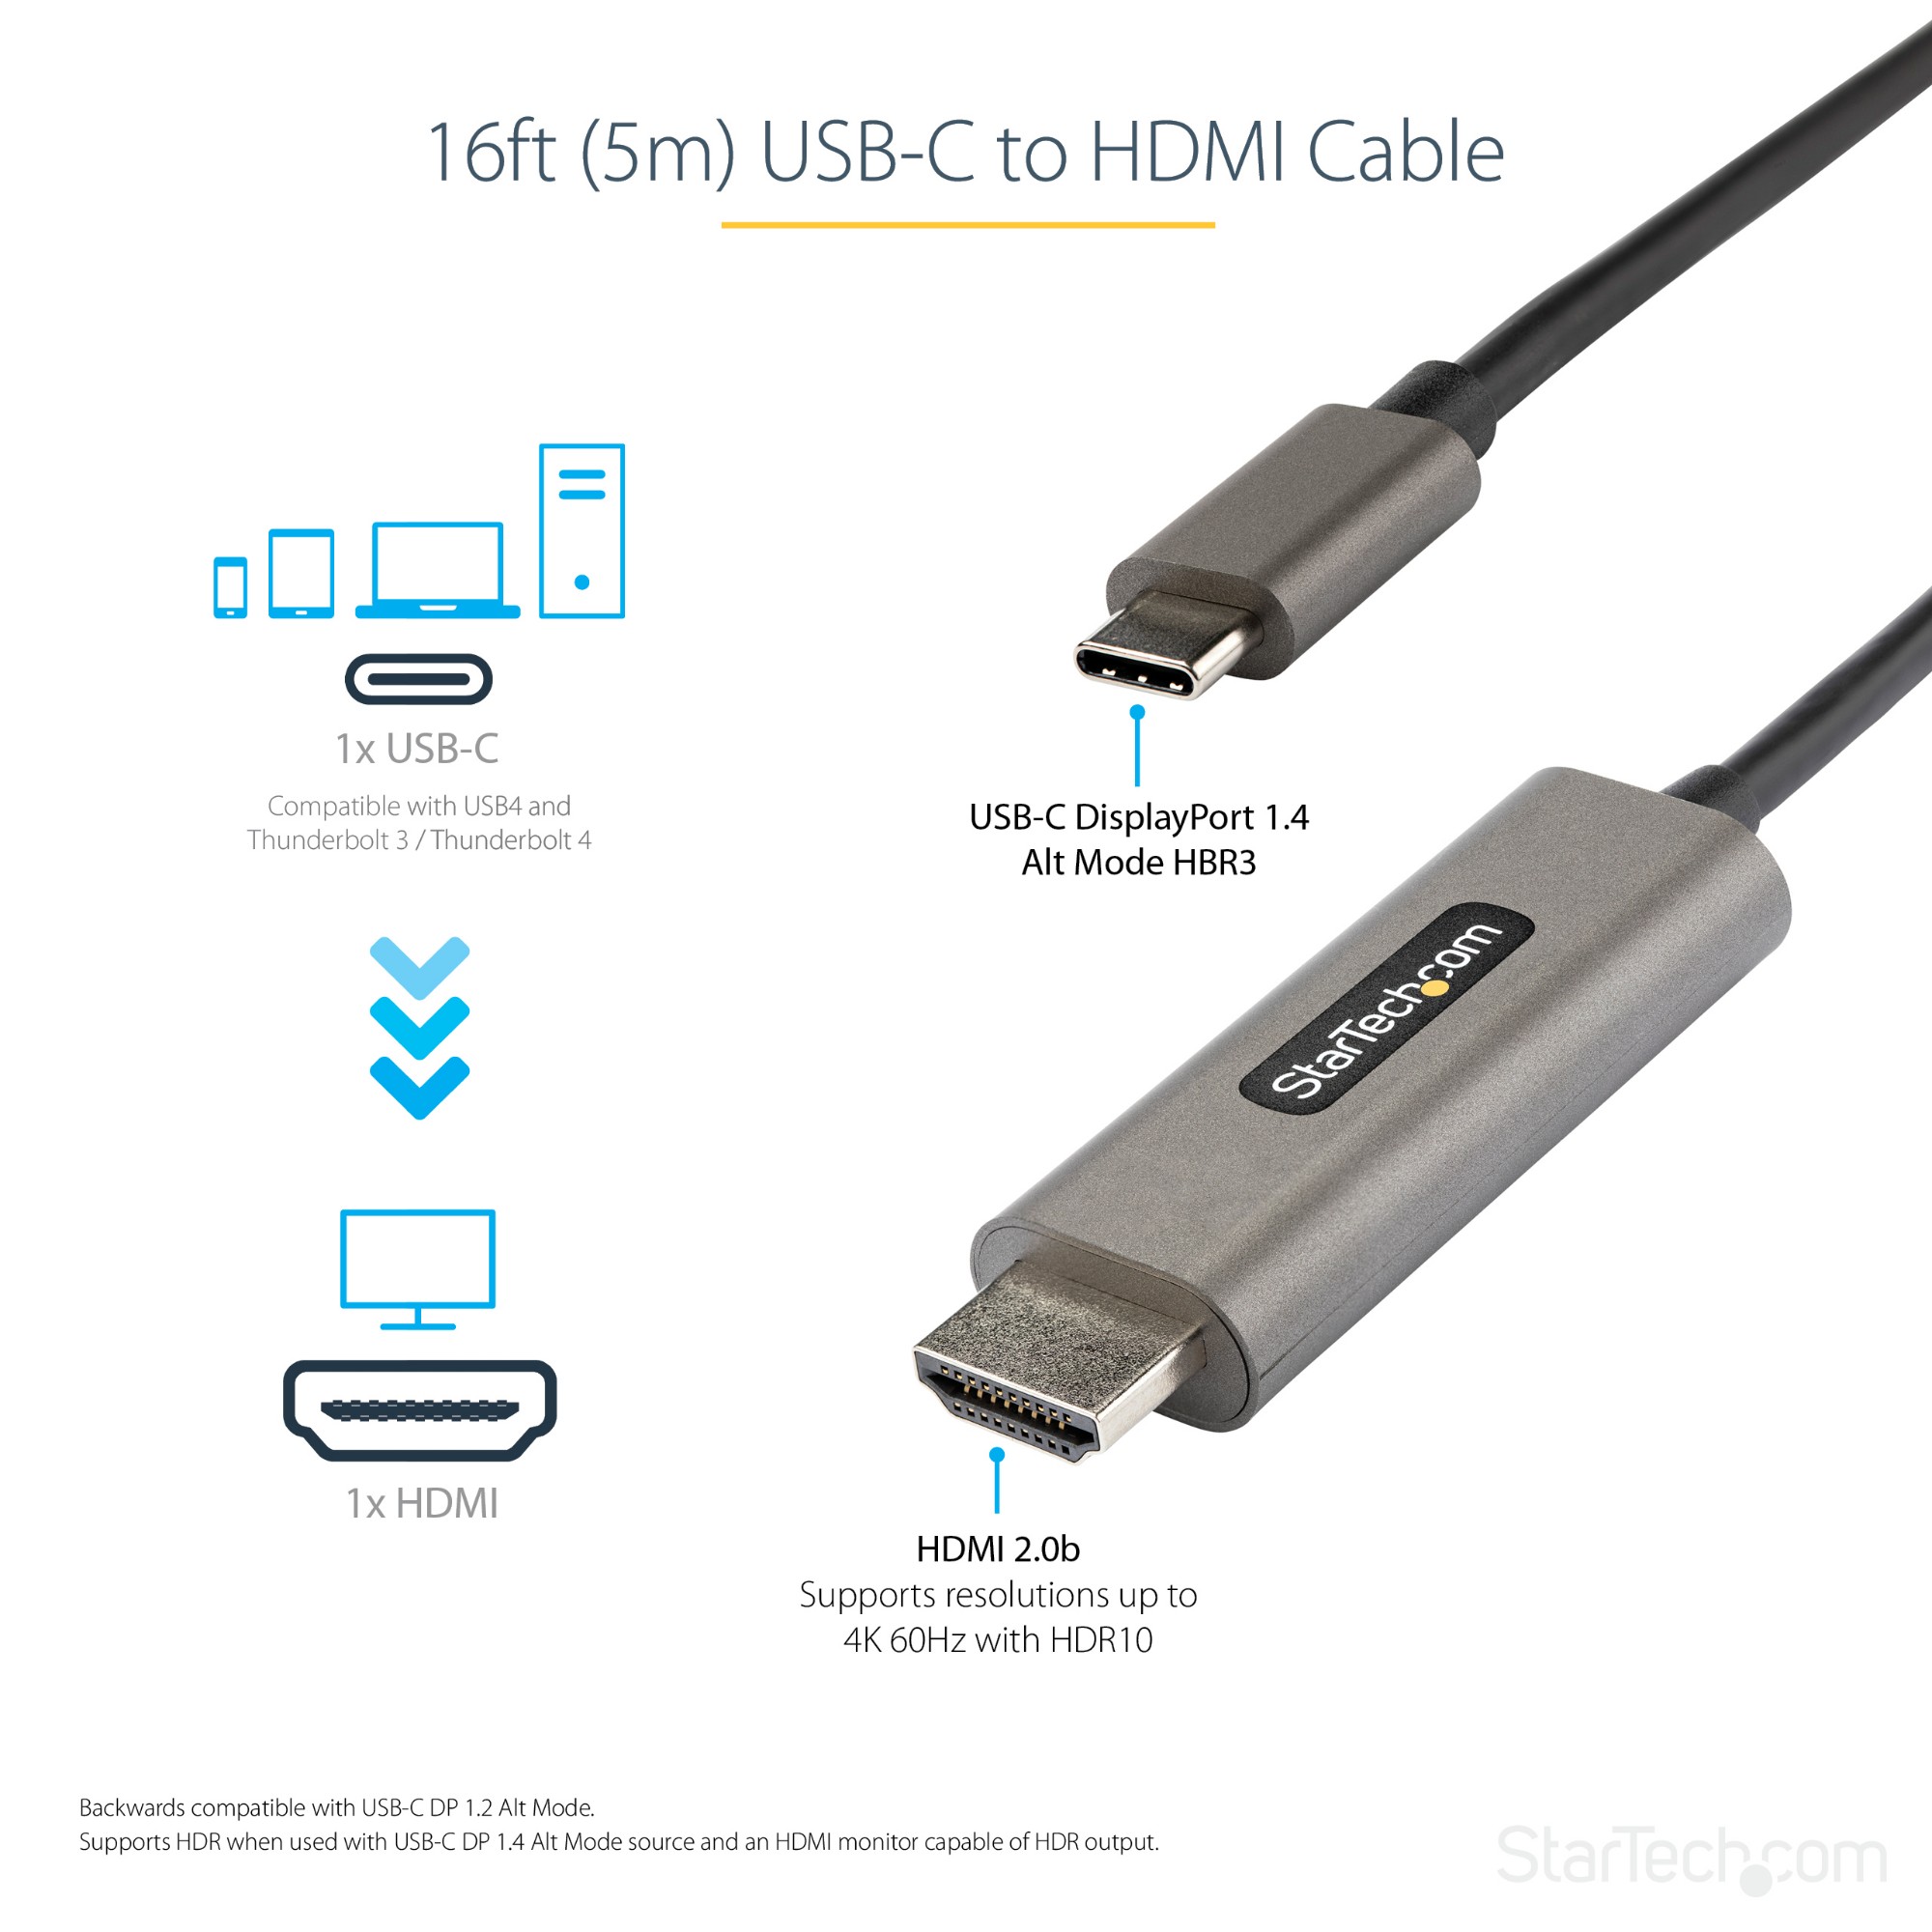 StarTech.com 16ft (5m) USB C to HDMI Cable 4K 60Hz w/ HDR10 - Ultra HD USB Type-C to 4K HDMI 2.0b Video Adapter Cable - USB-C to HDMI HDR Monitor/Display Converter - DP 1.4 Alt Mode HBR3